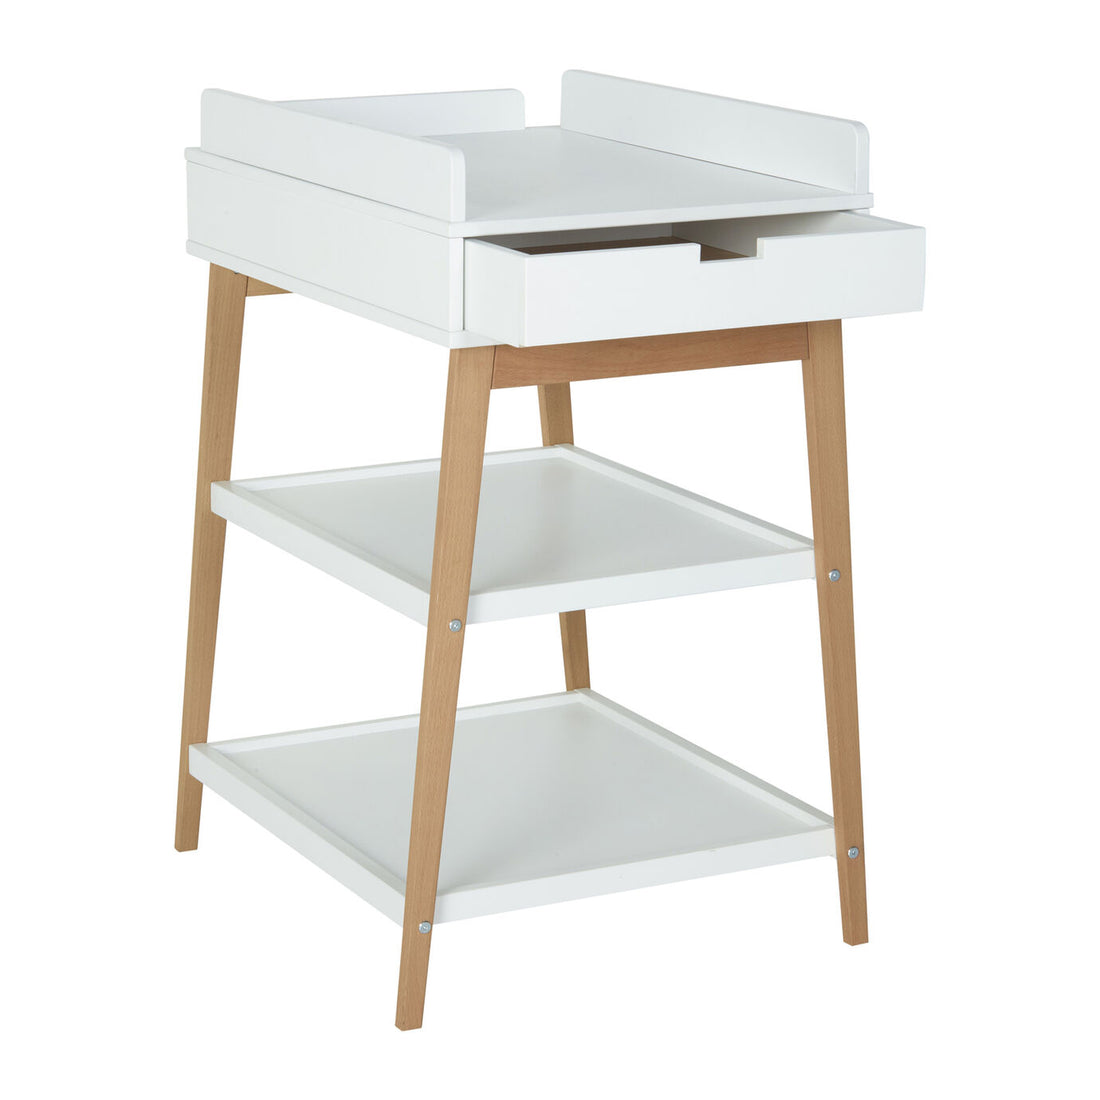 quax-changing-table-hip-drawer-white-natural- (4)